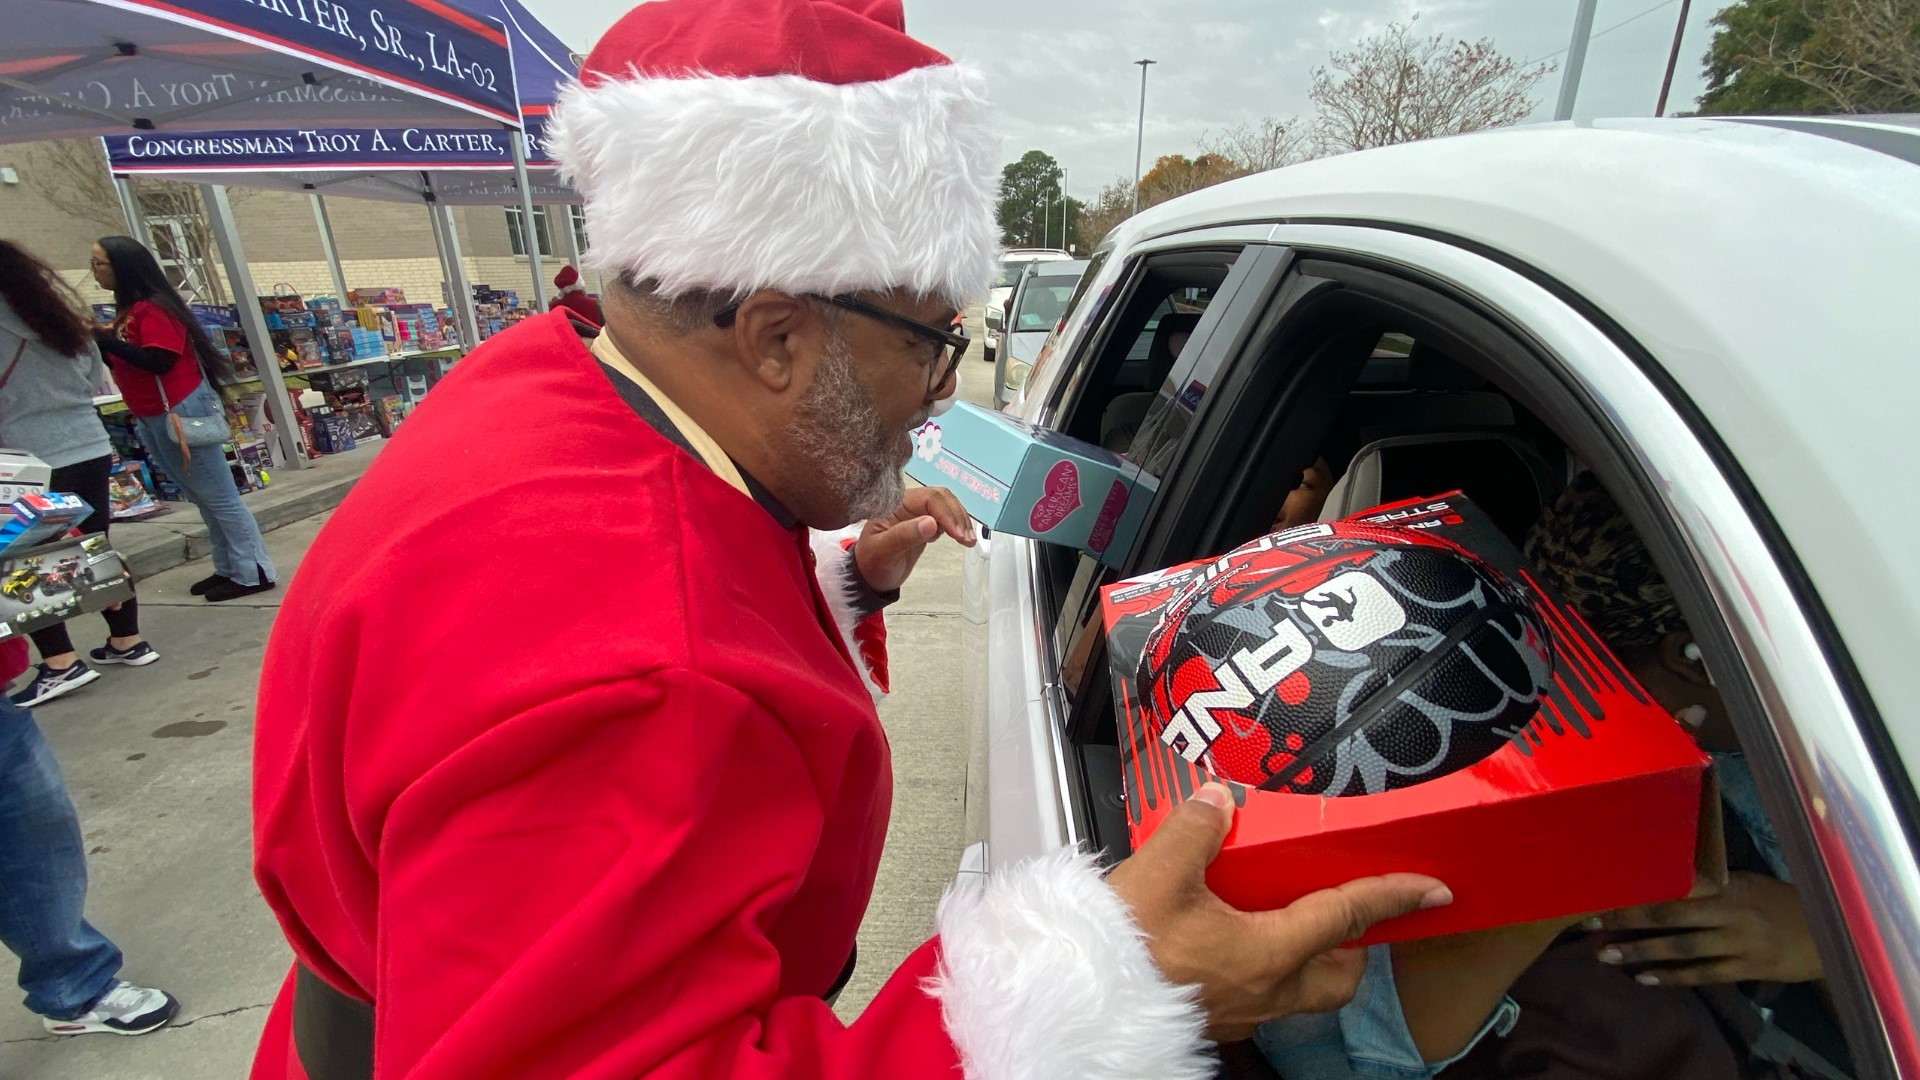 Congressman Troy Carter hands out toys to the community.